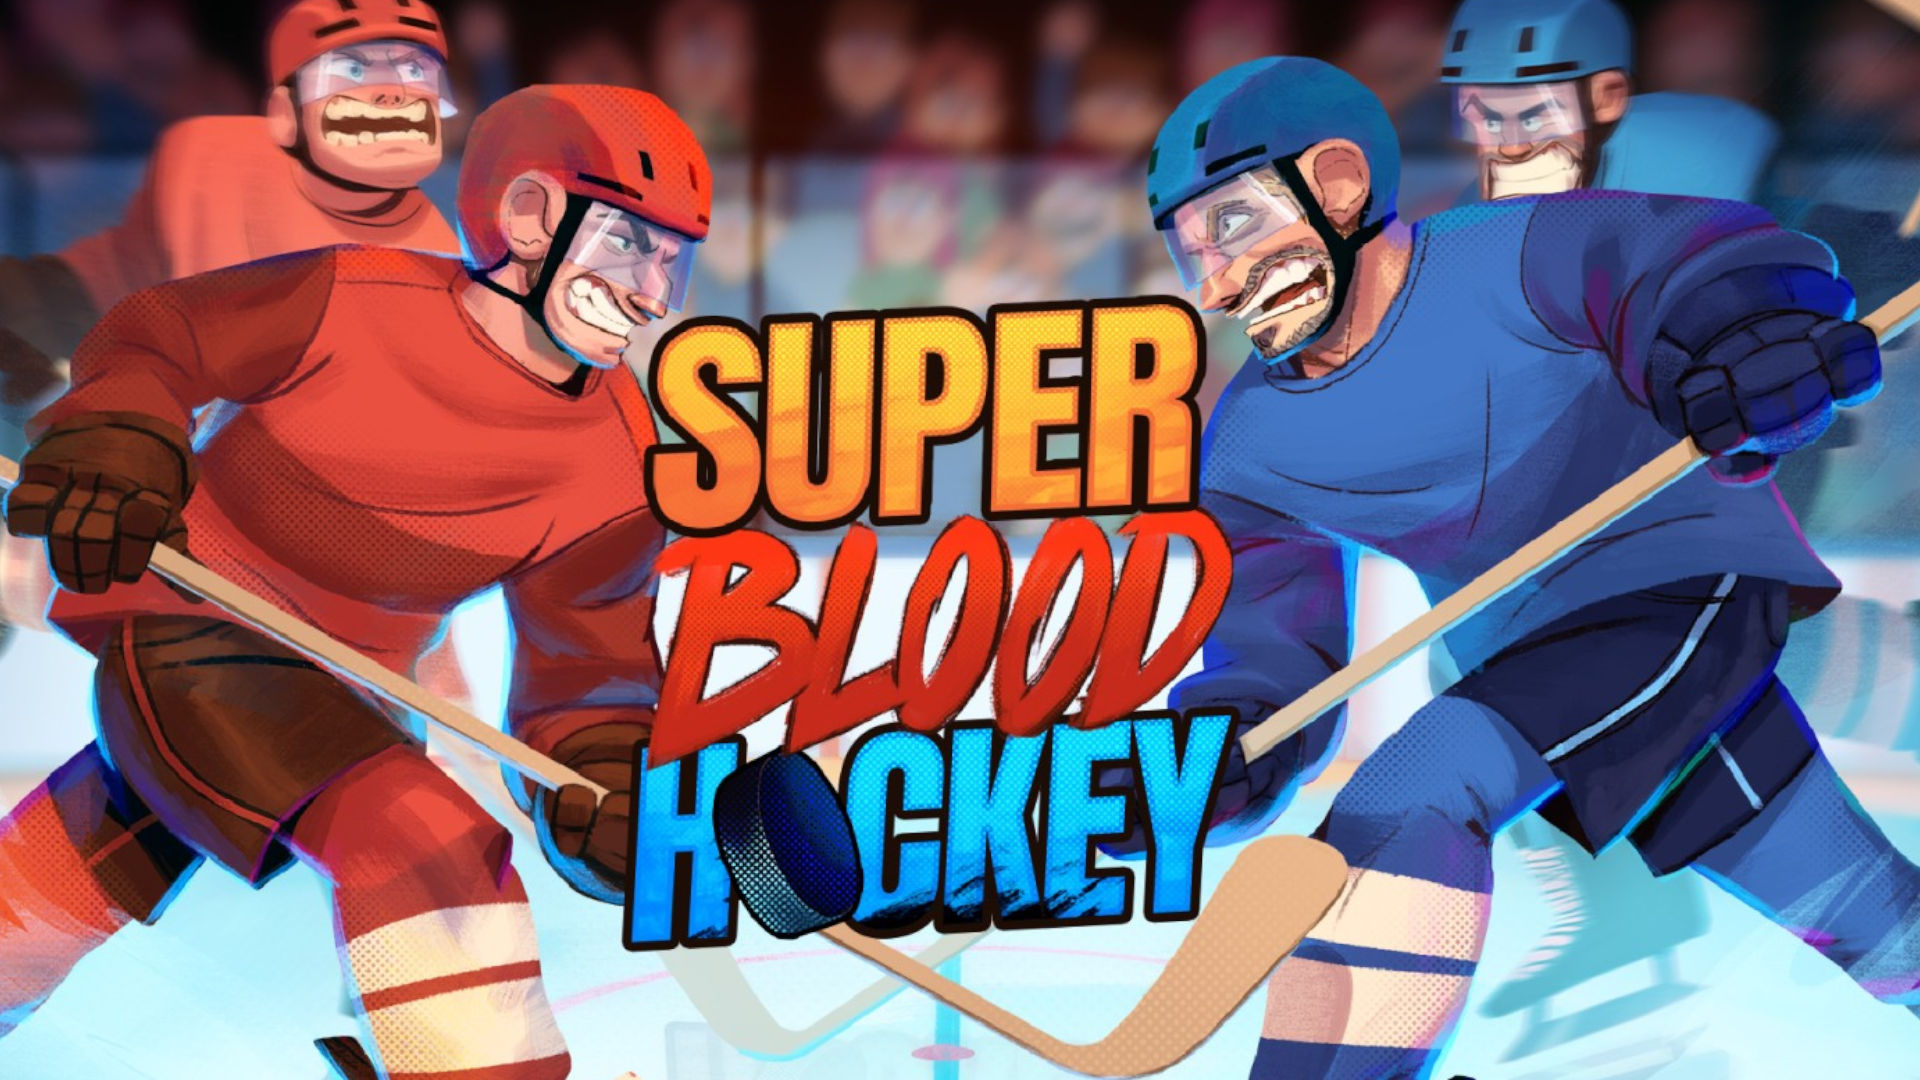 Cover art for Super Blood Hockey, one of the more violent Switch hockey games